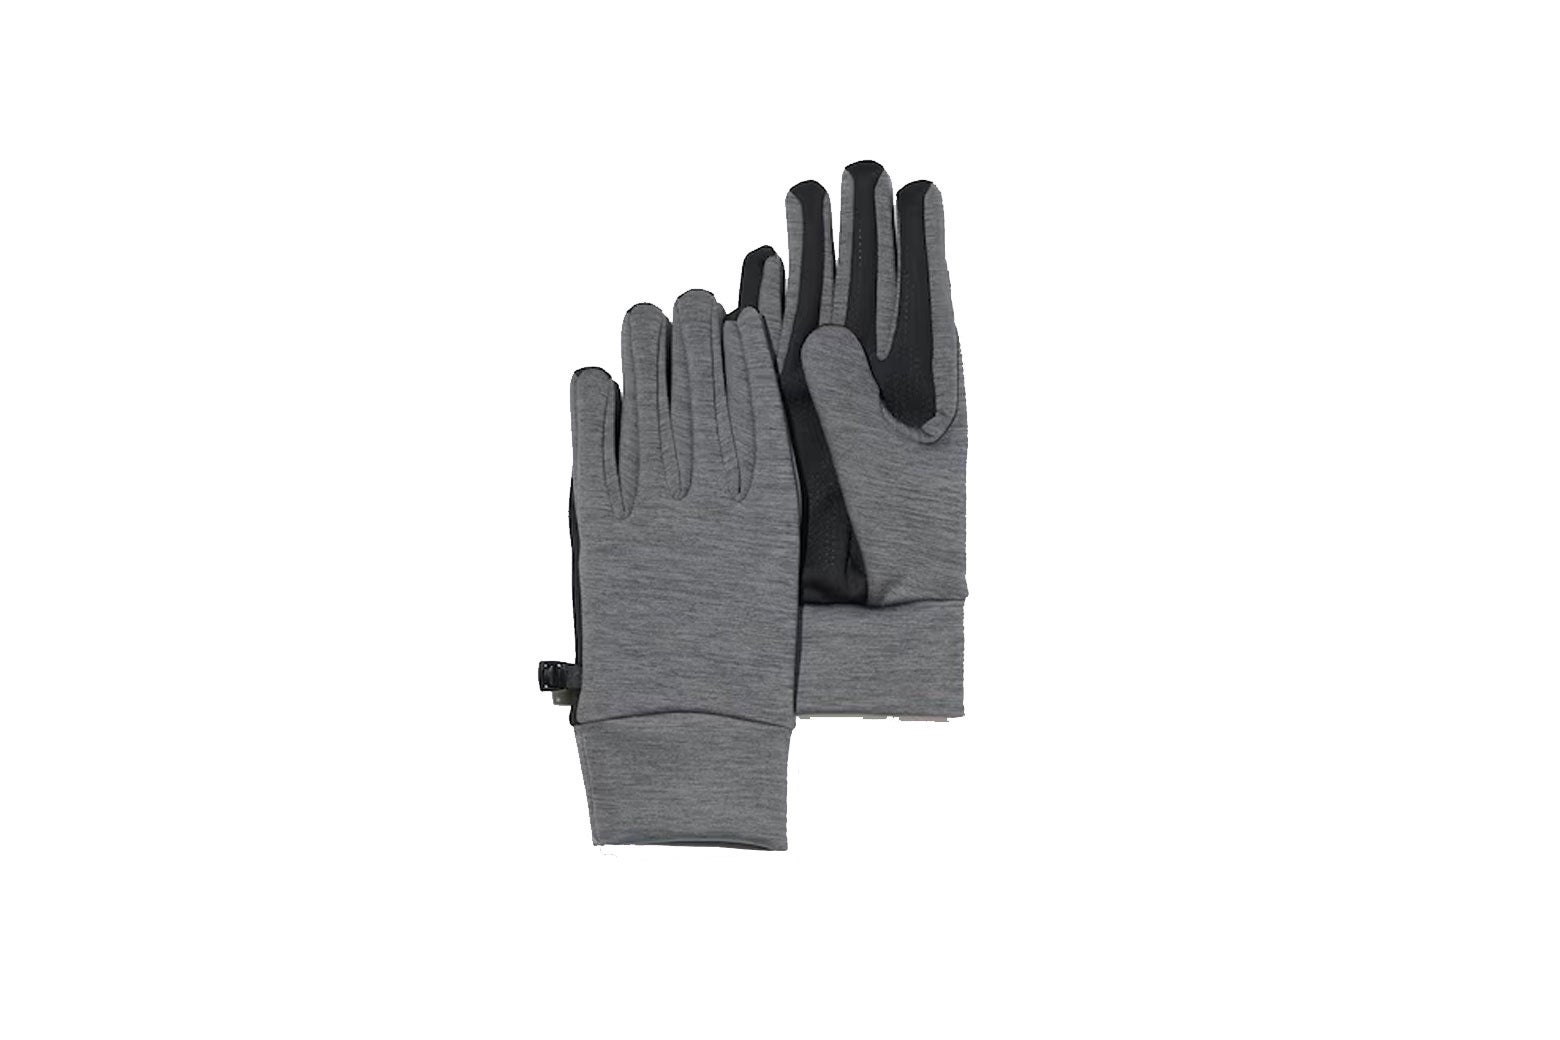 Thin gray gloves with black on the palm surface. 